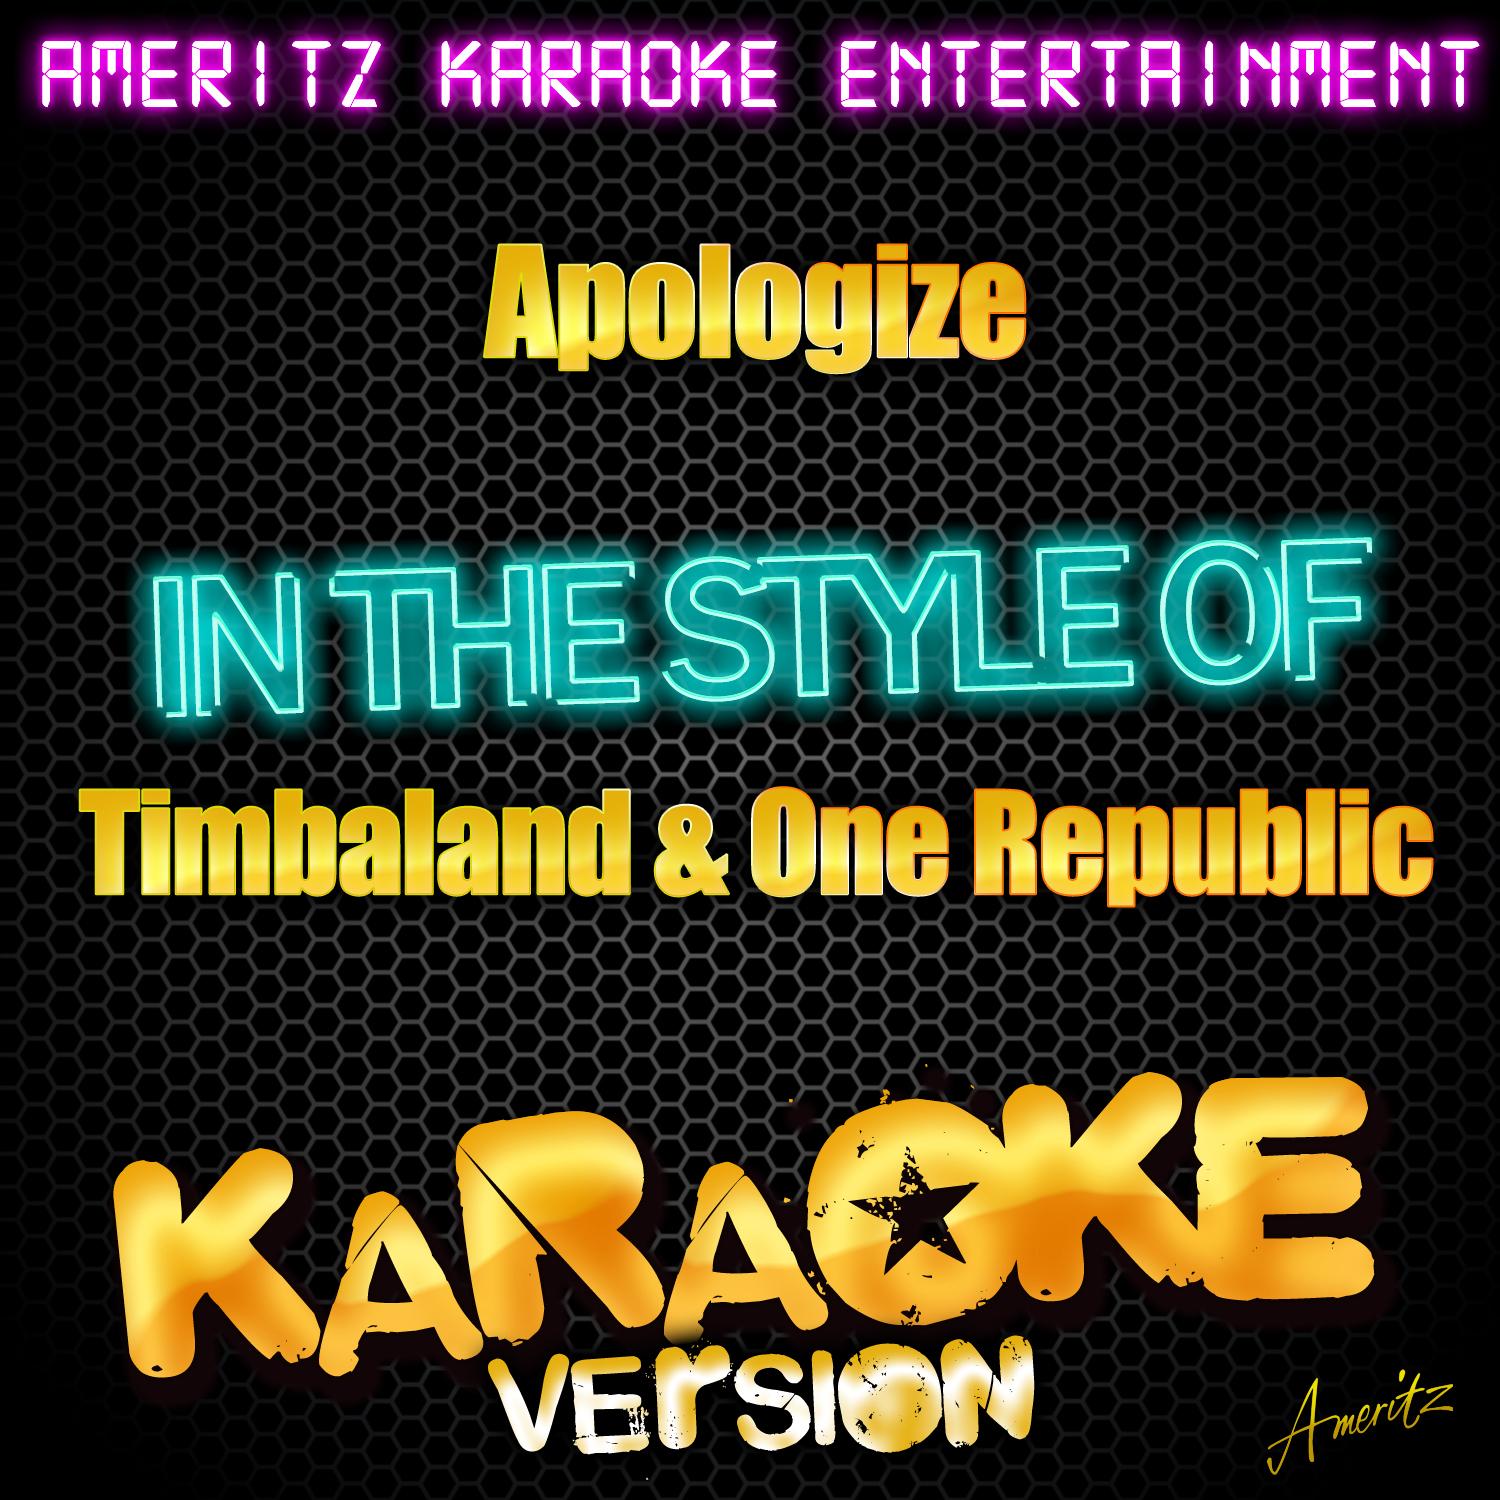 Apologize (In the Style of Timbaland & One Republic) [Karaoke Version]